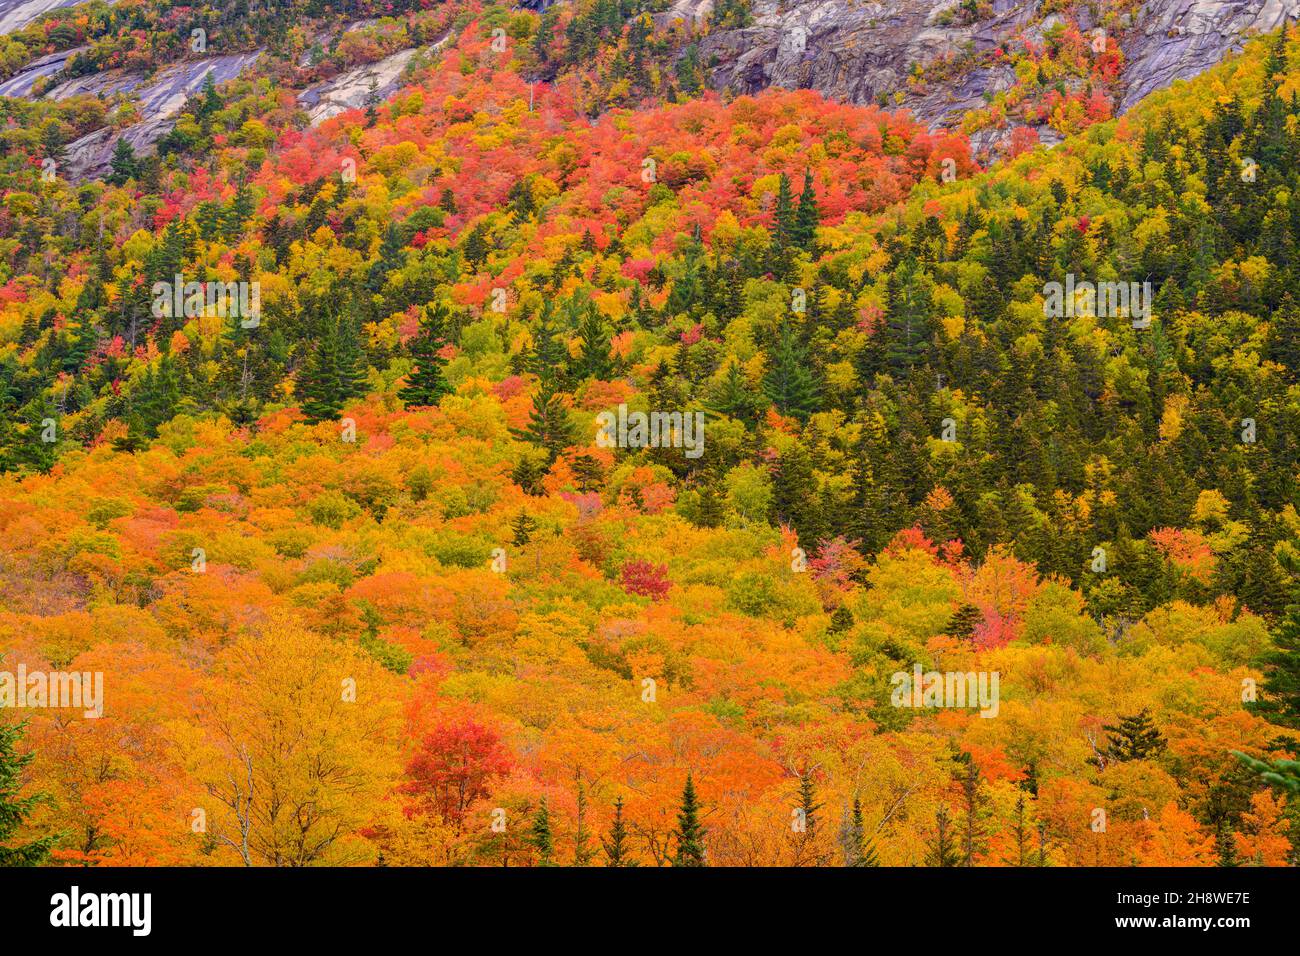 Autumn foliage in the deciduous forest on New England hillsides, Crawford Notch State Park, New Hampshire, USA Stock Photo